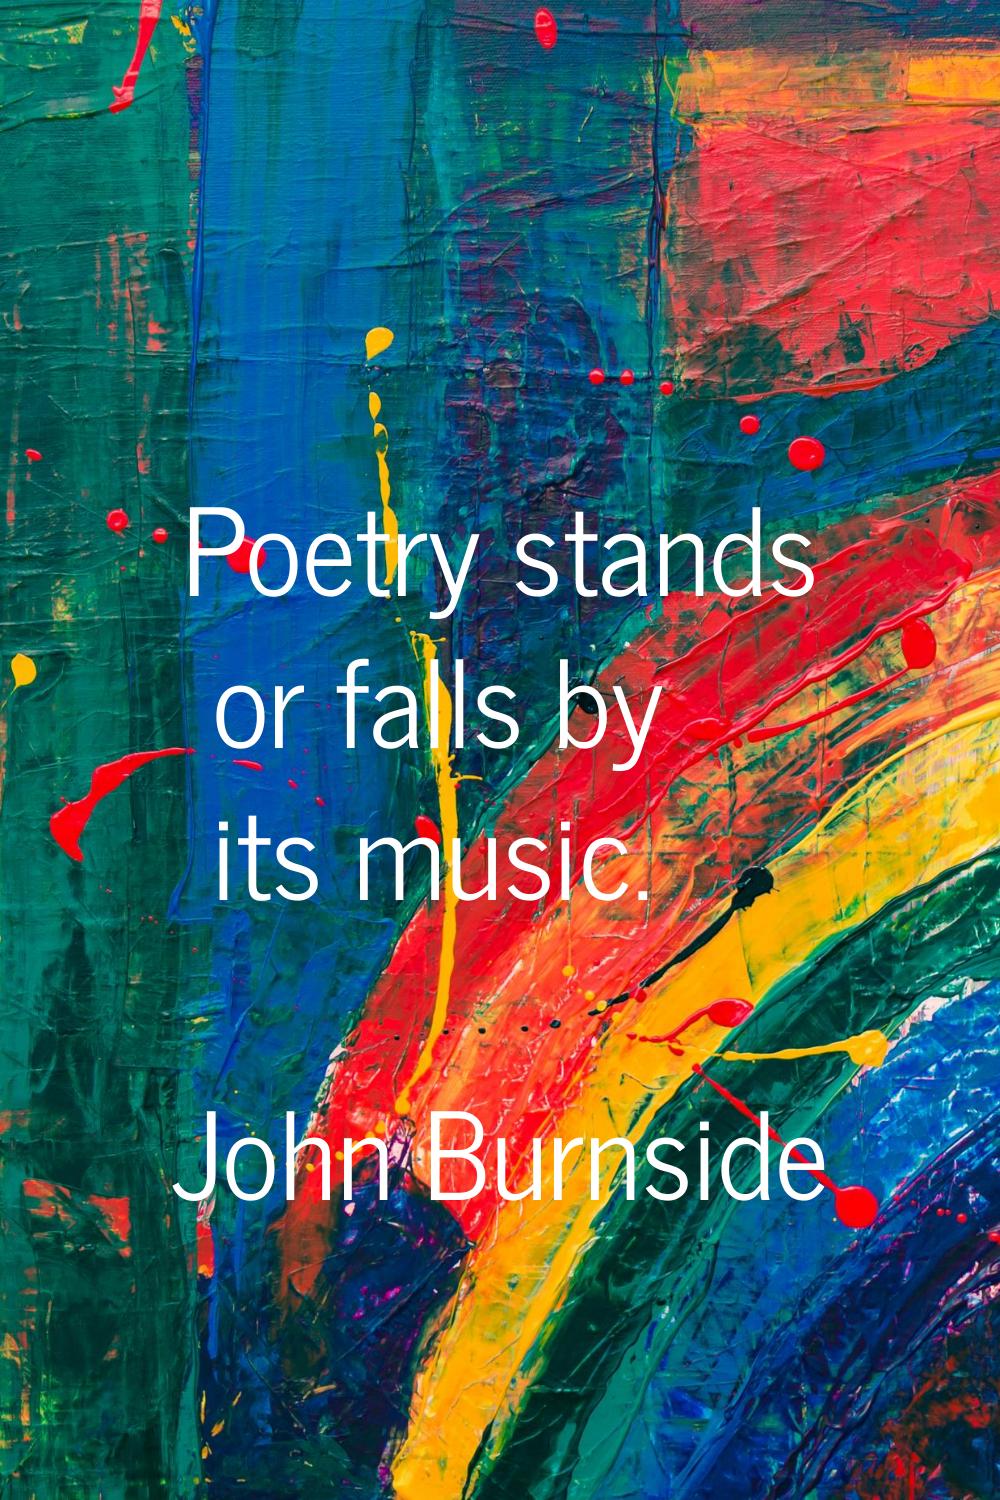 Poetry stands or falls by its music.